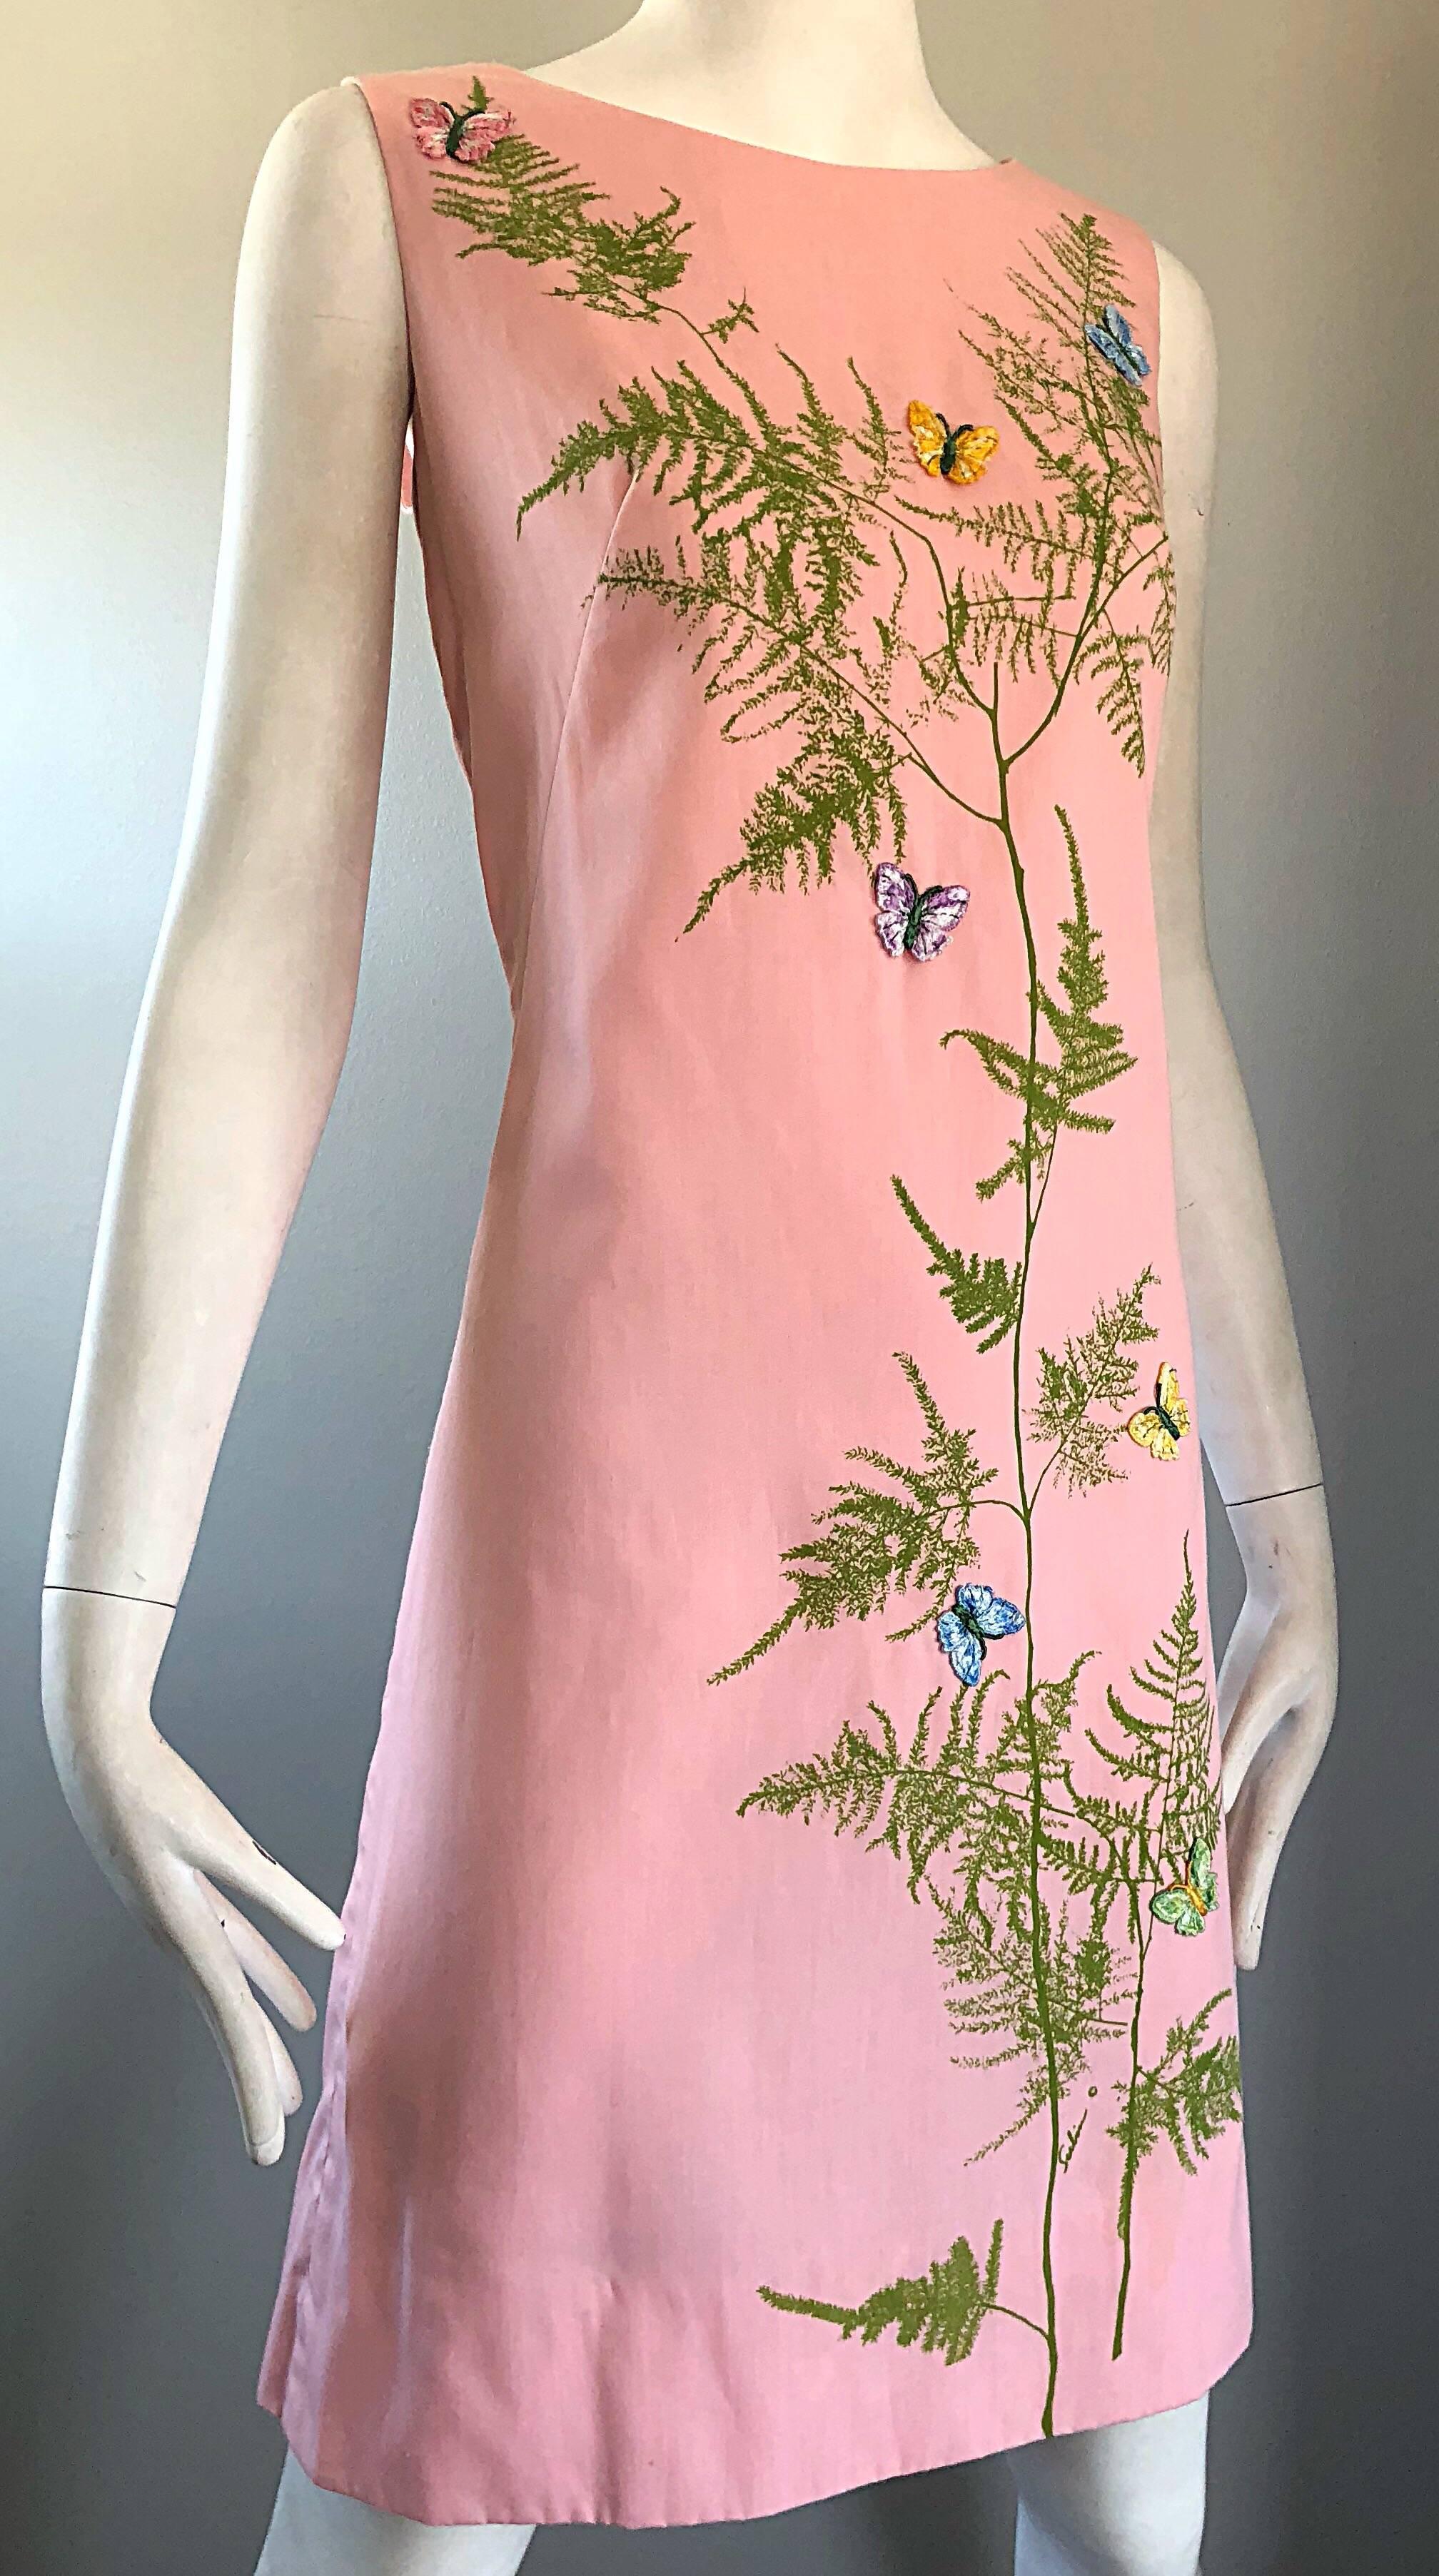 Chic 1960s Pale Pink Trees + Embrodiered Butterflies Novelty Vintage Shift Dress 1